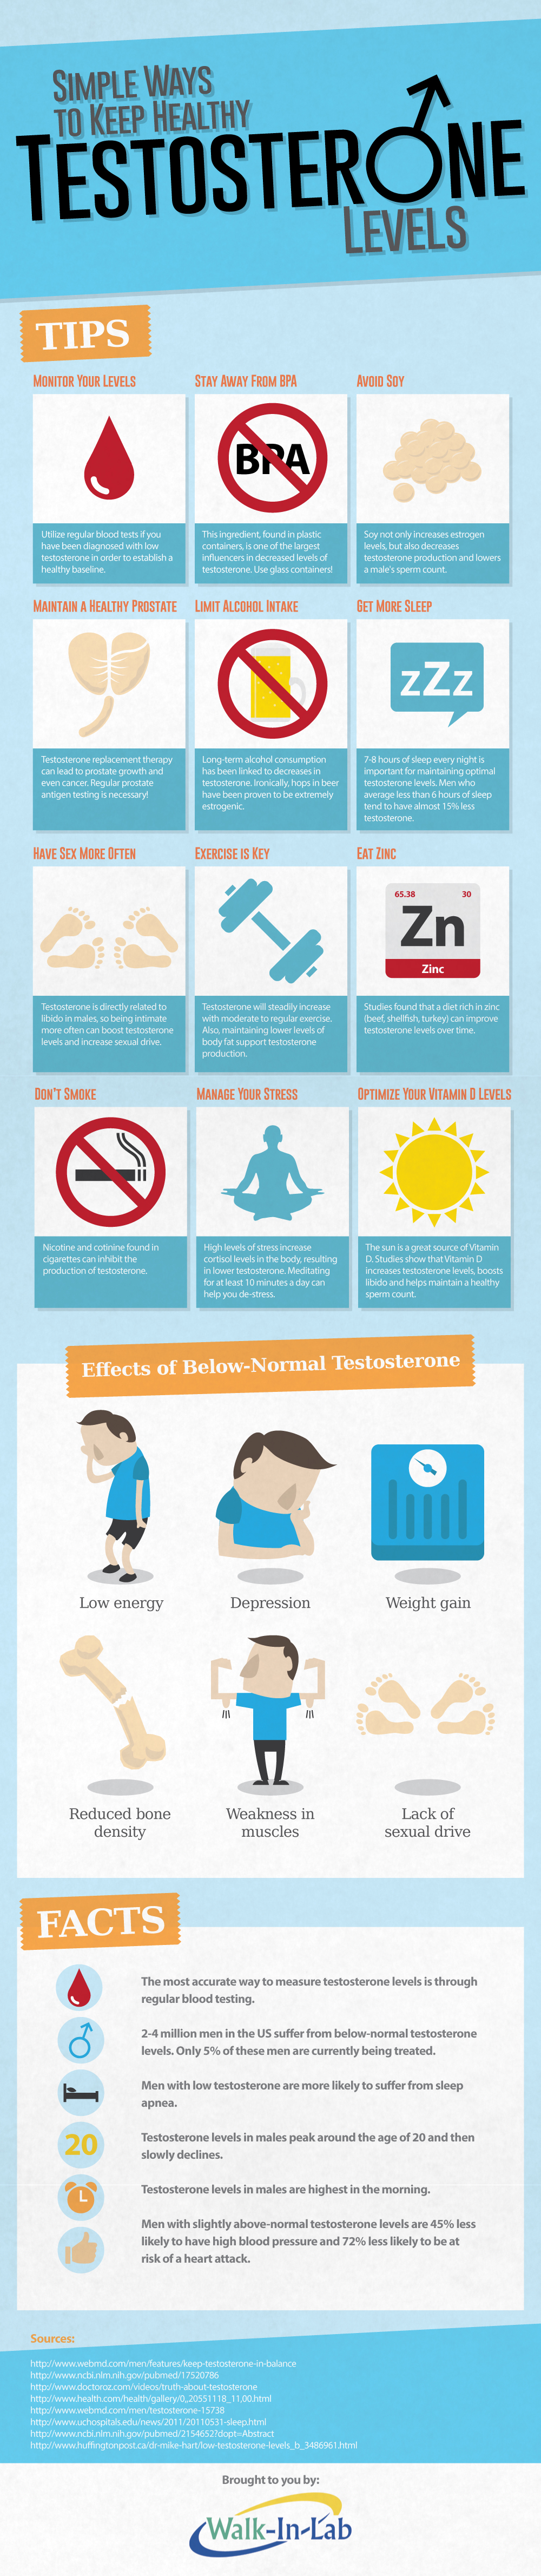 Simple Ways to Keep Healthy Testosterone Levels